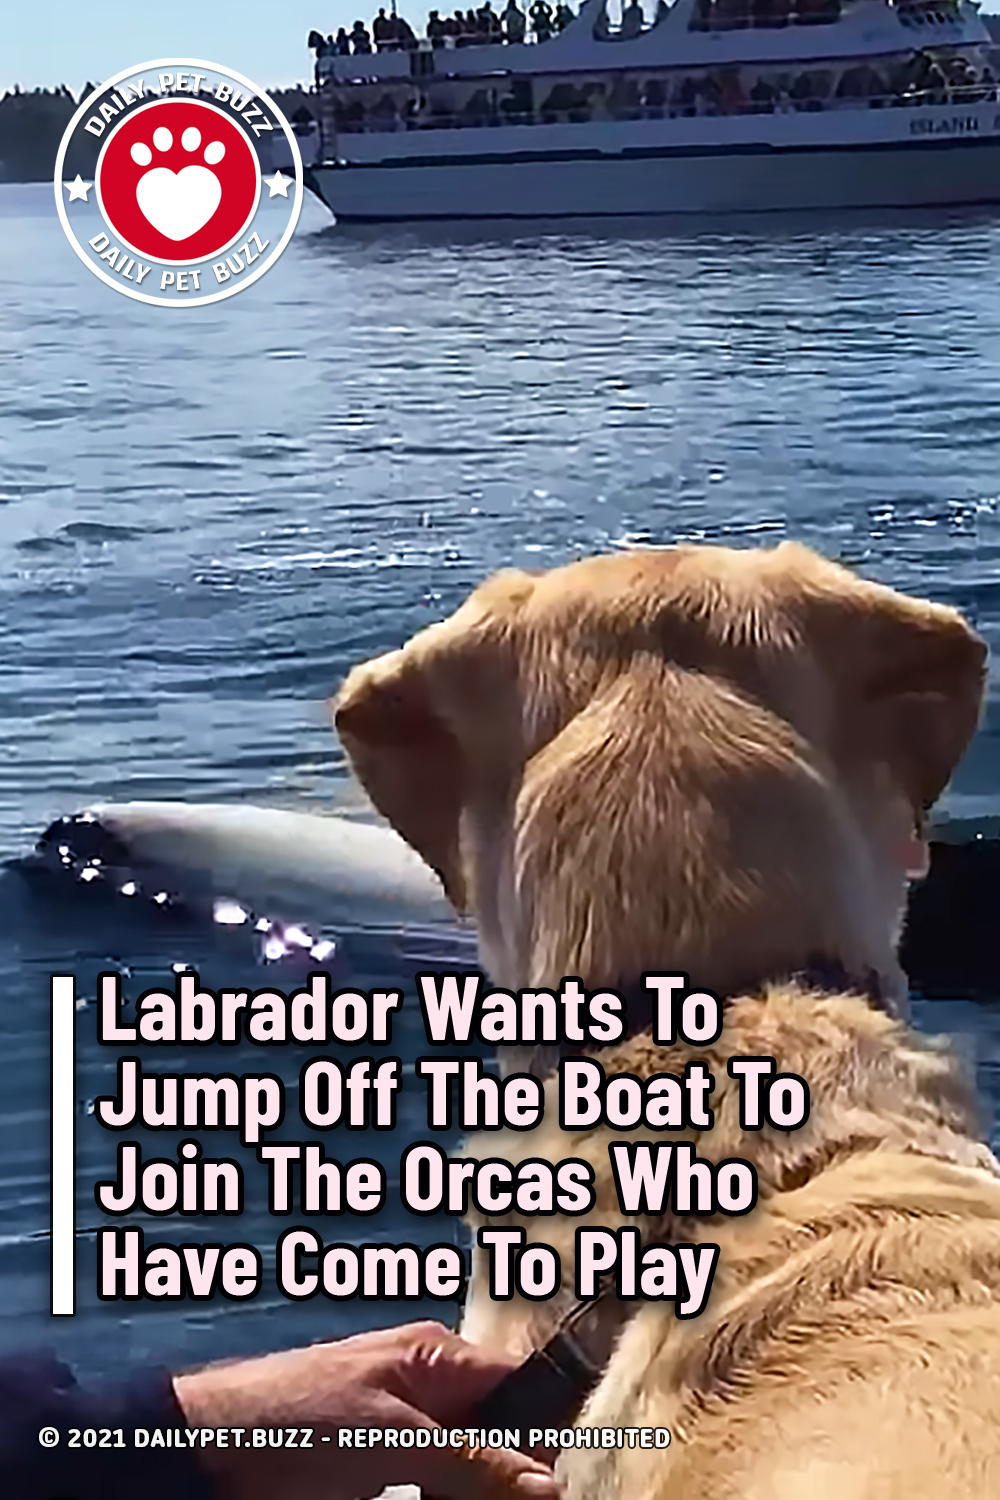 Labrador Wants To Jump Off The Boat To Join The Orcas Who Have Come To Play